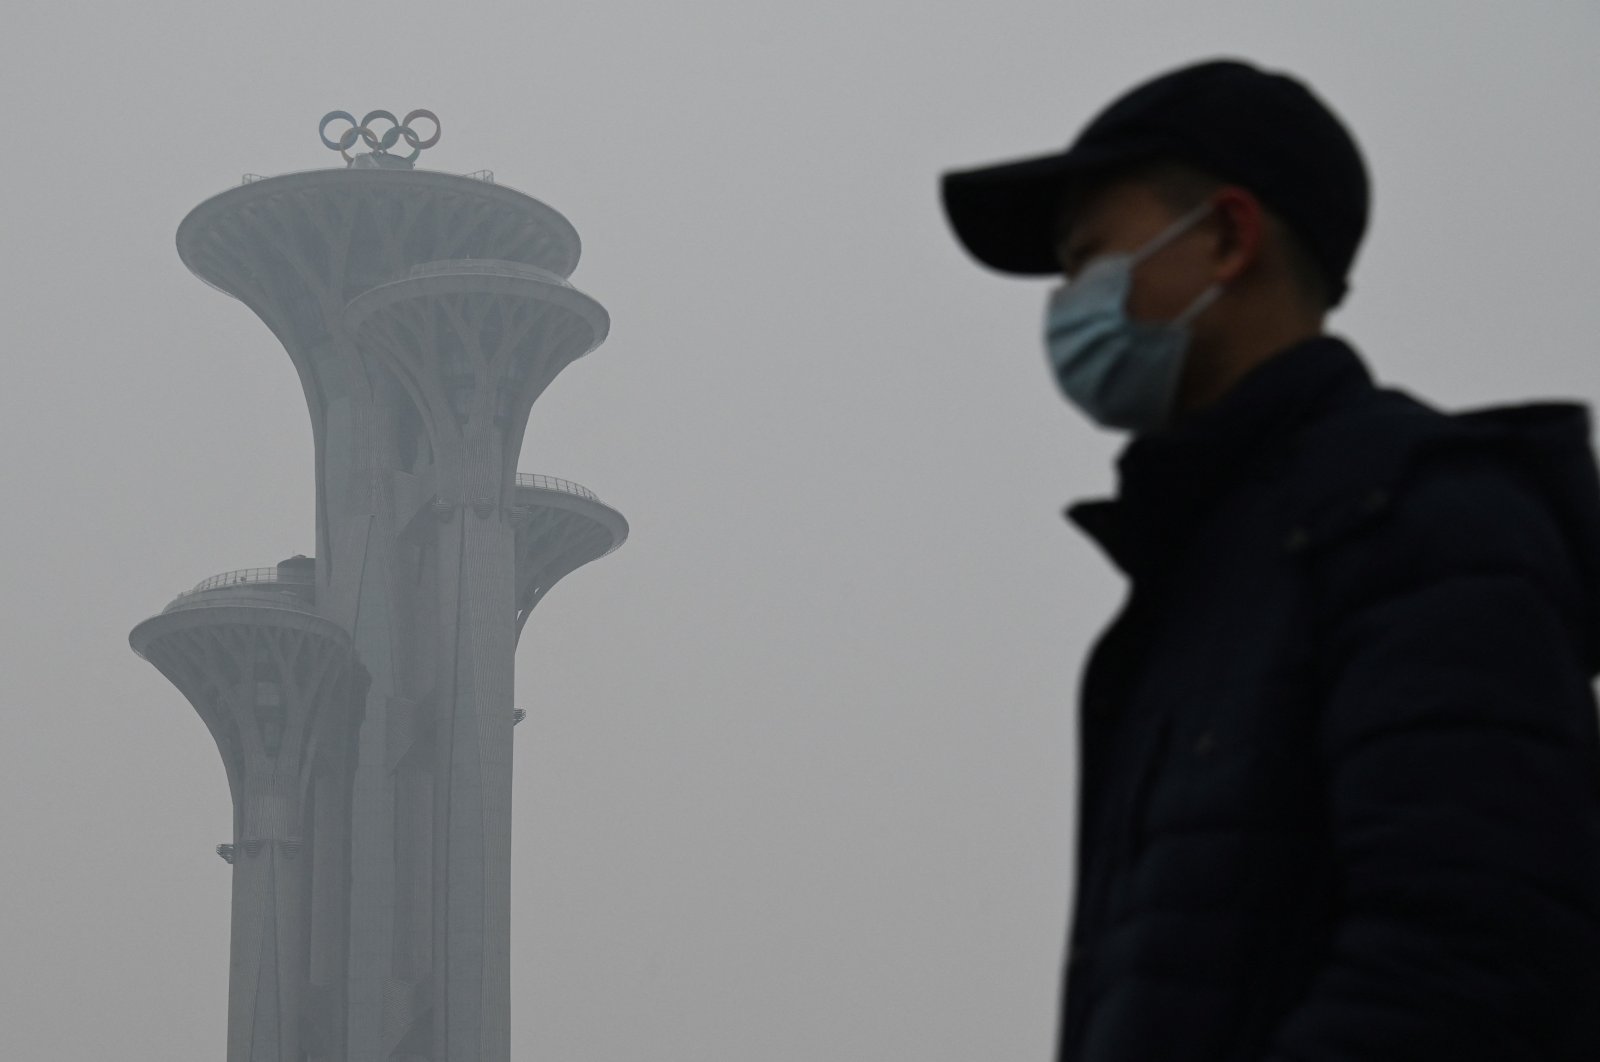 A man walks in the Olympic Park during a smoggy day in Beijing, China, Jan. 24, 2022. (AFP Photo)